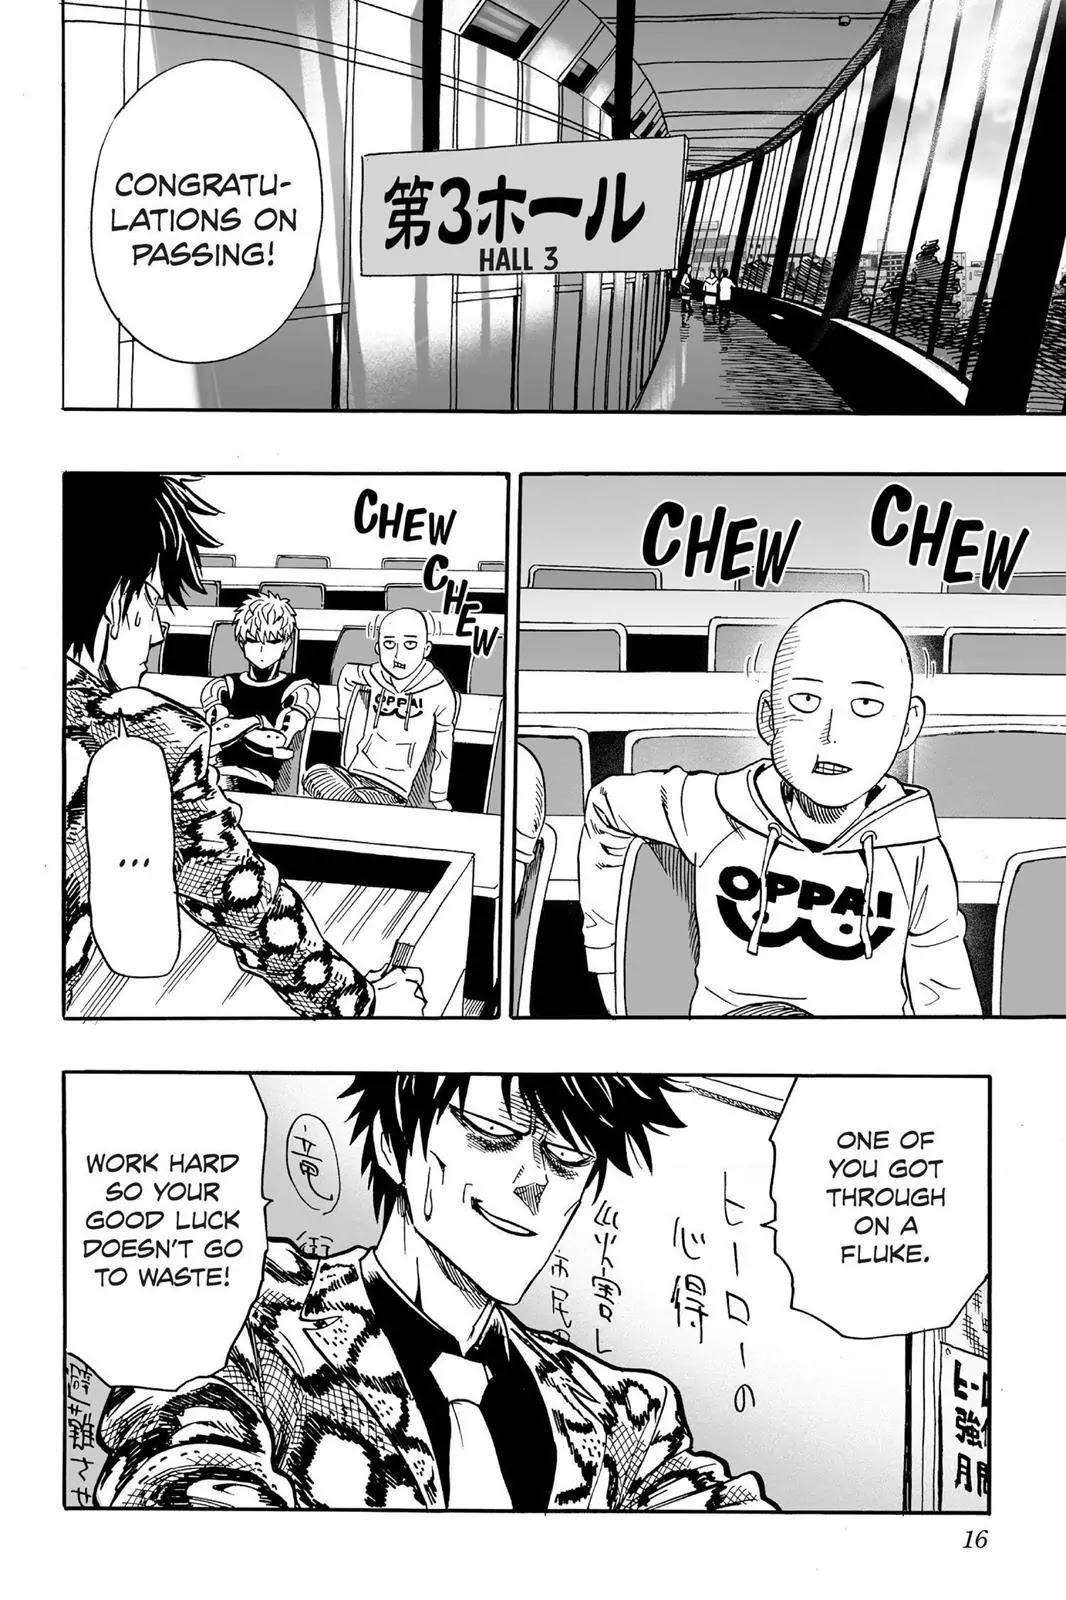 One Punch Man, Chapter 16 I Passed image 17